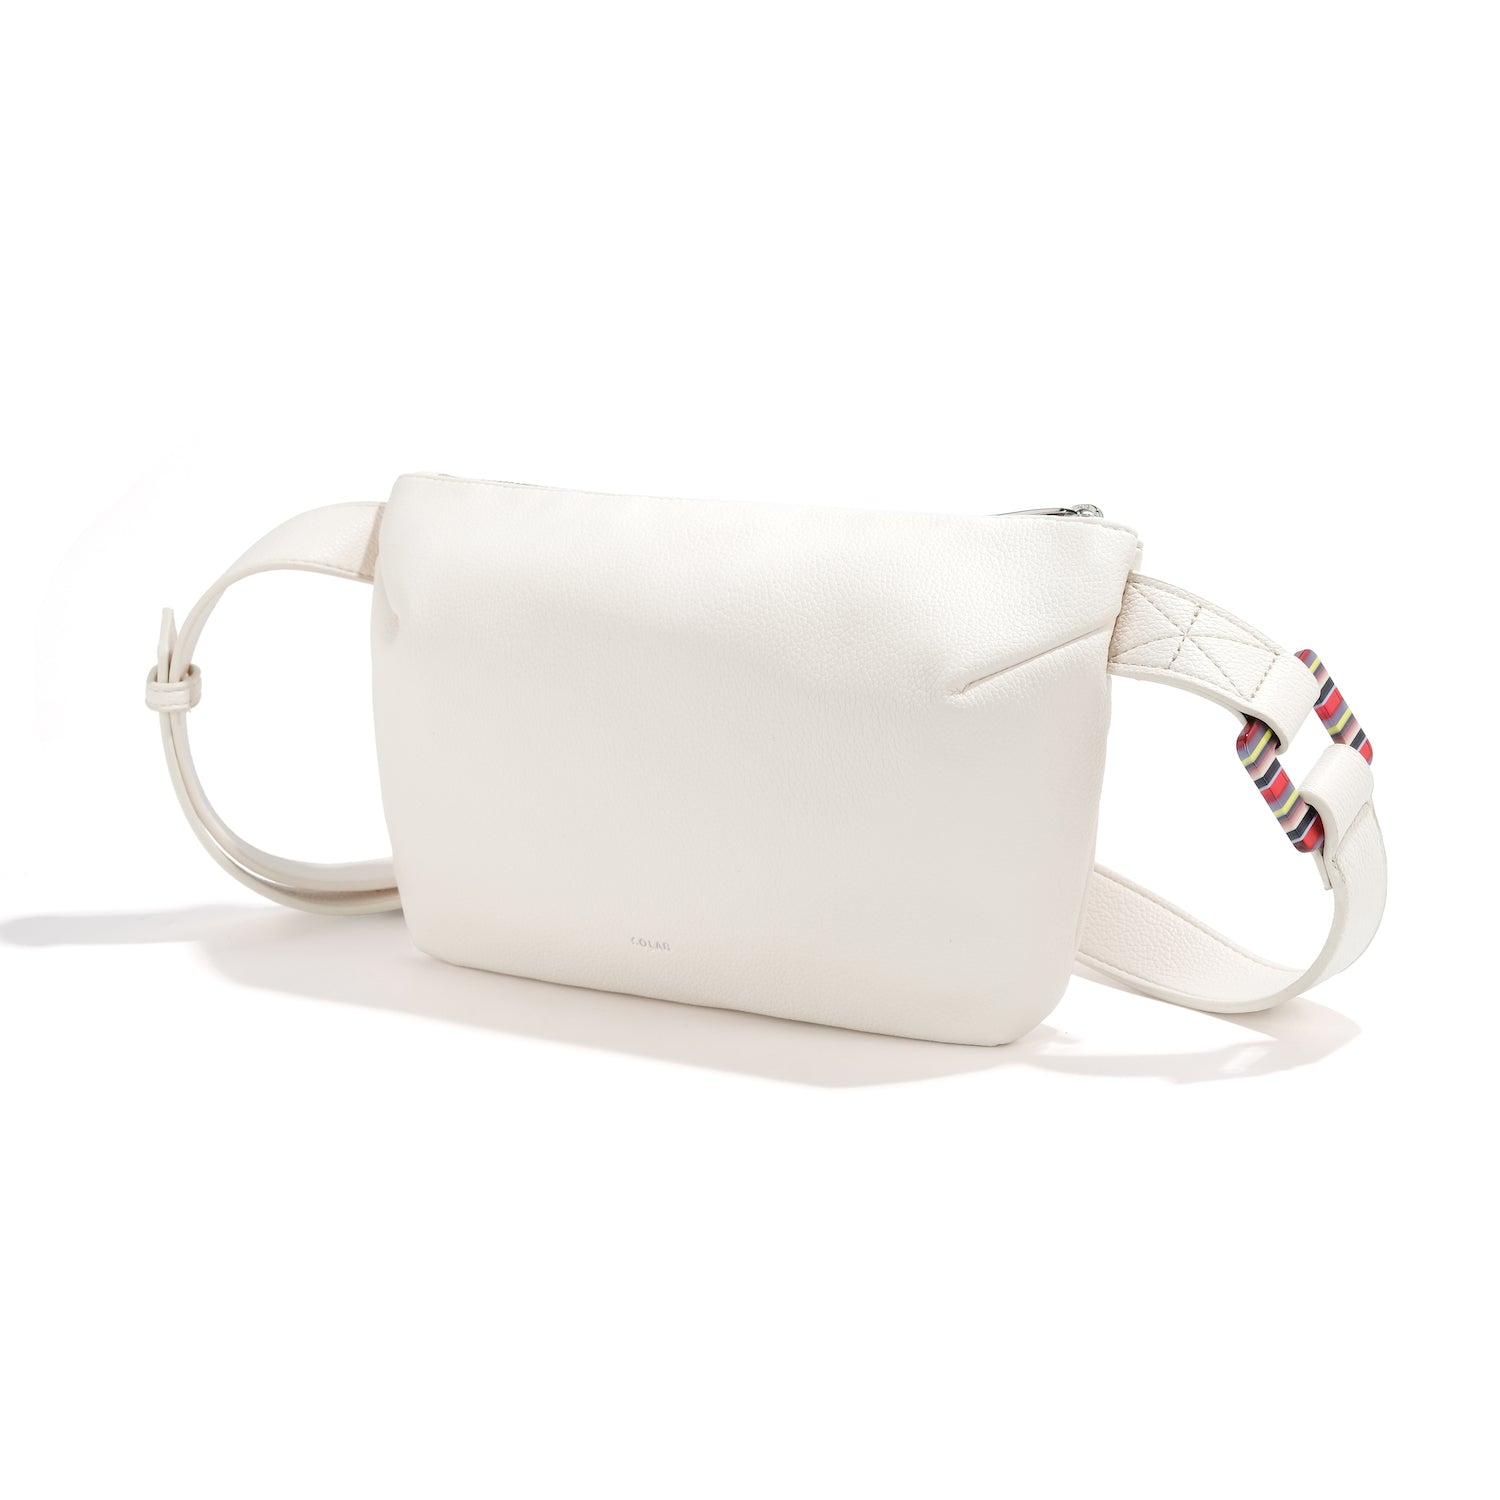 co-lab Francis Belt Bag - Cream Accessories - Other Accessories - Handbags & Wallets by co-lab | Grace the Boutique